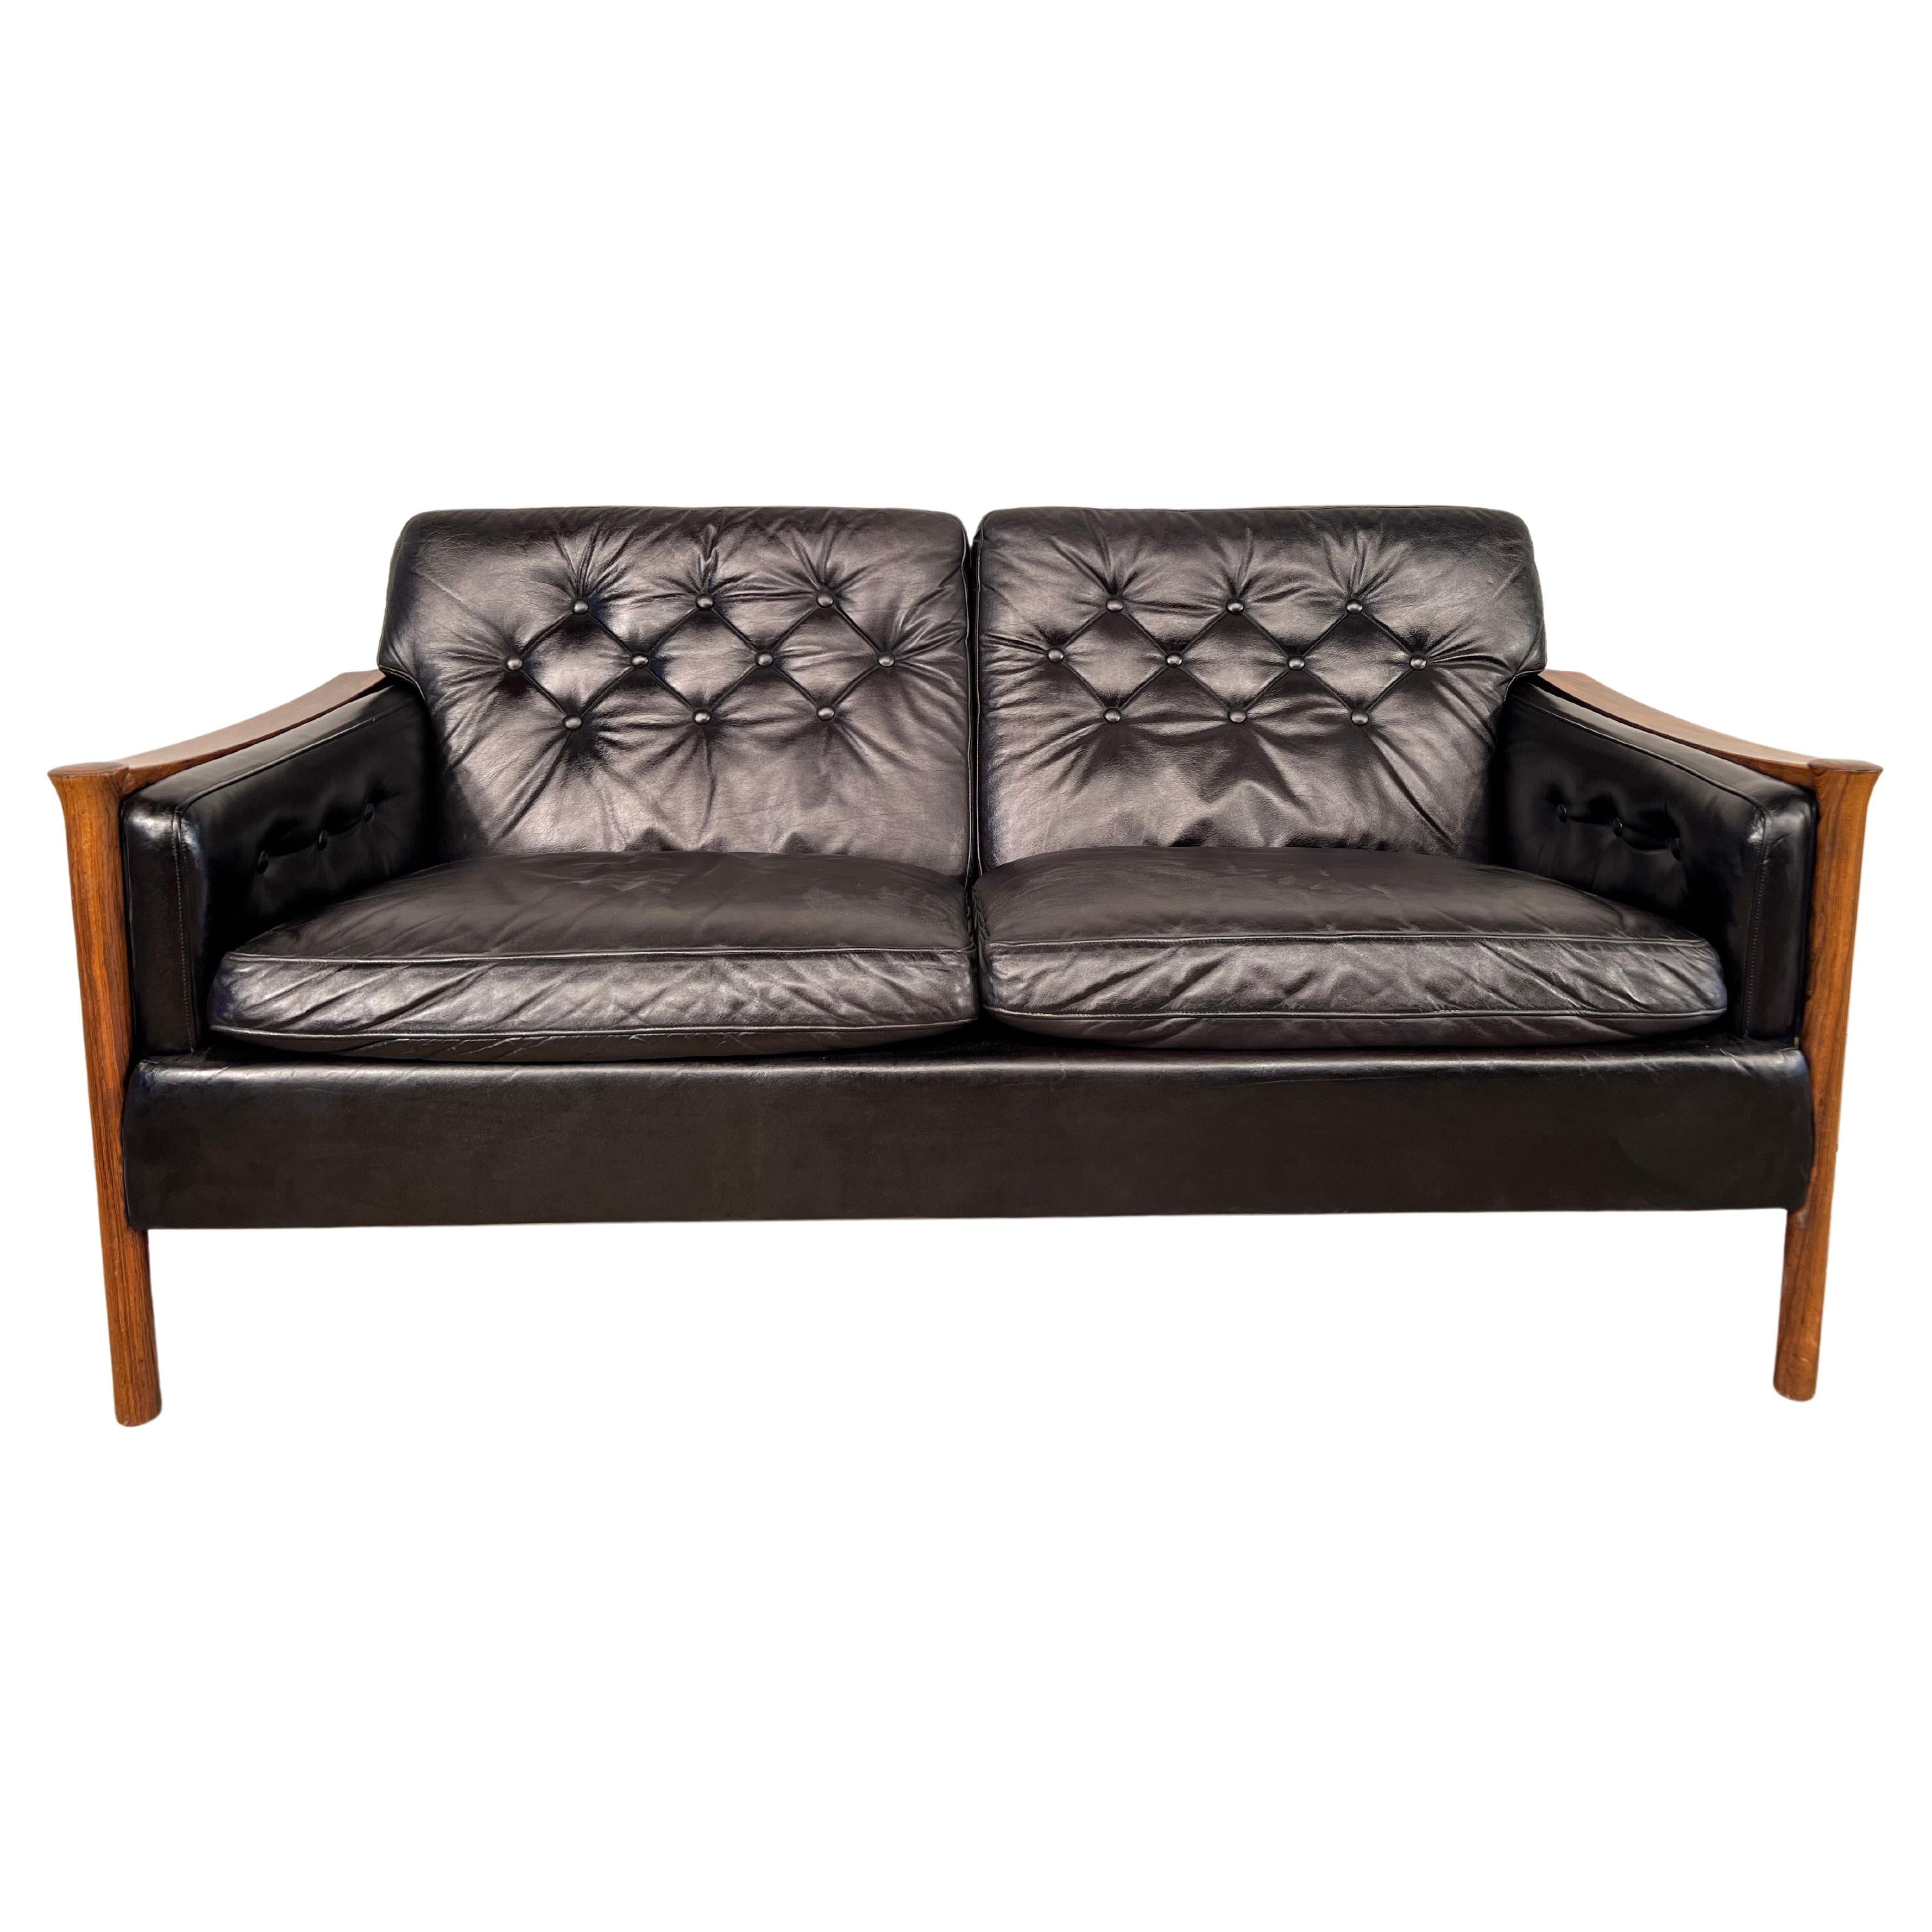 V Neat Two Seater Sofa in Leather by Torbjørn Afdal for Bruksbo Norway 70s #515